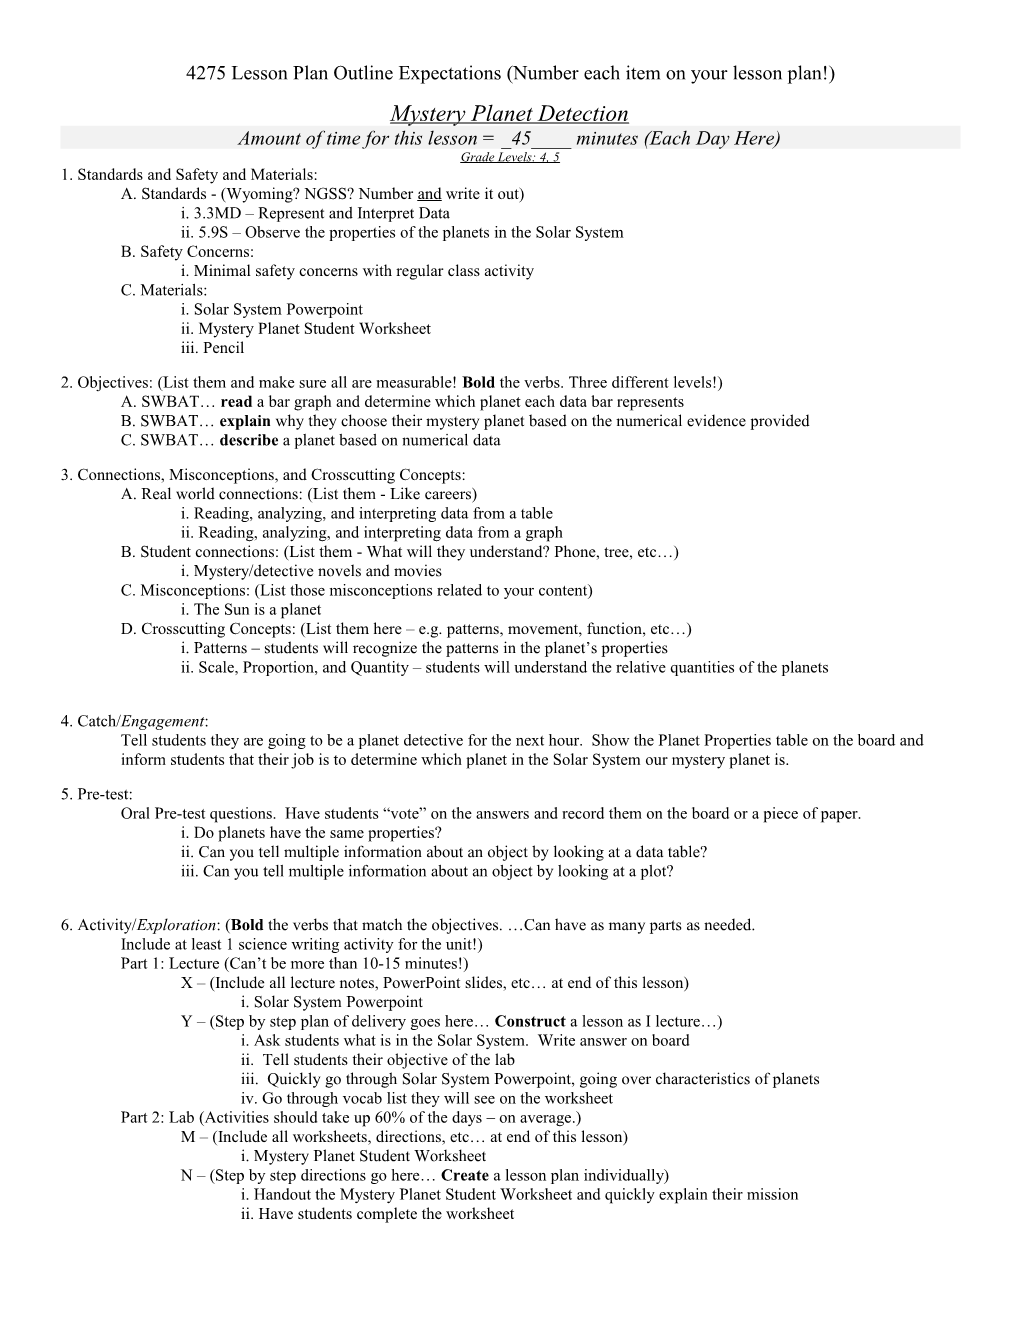 4275 Lesson Plan Outline Expectations (Number Each Item on Your Lesson Plan!)